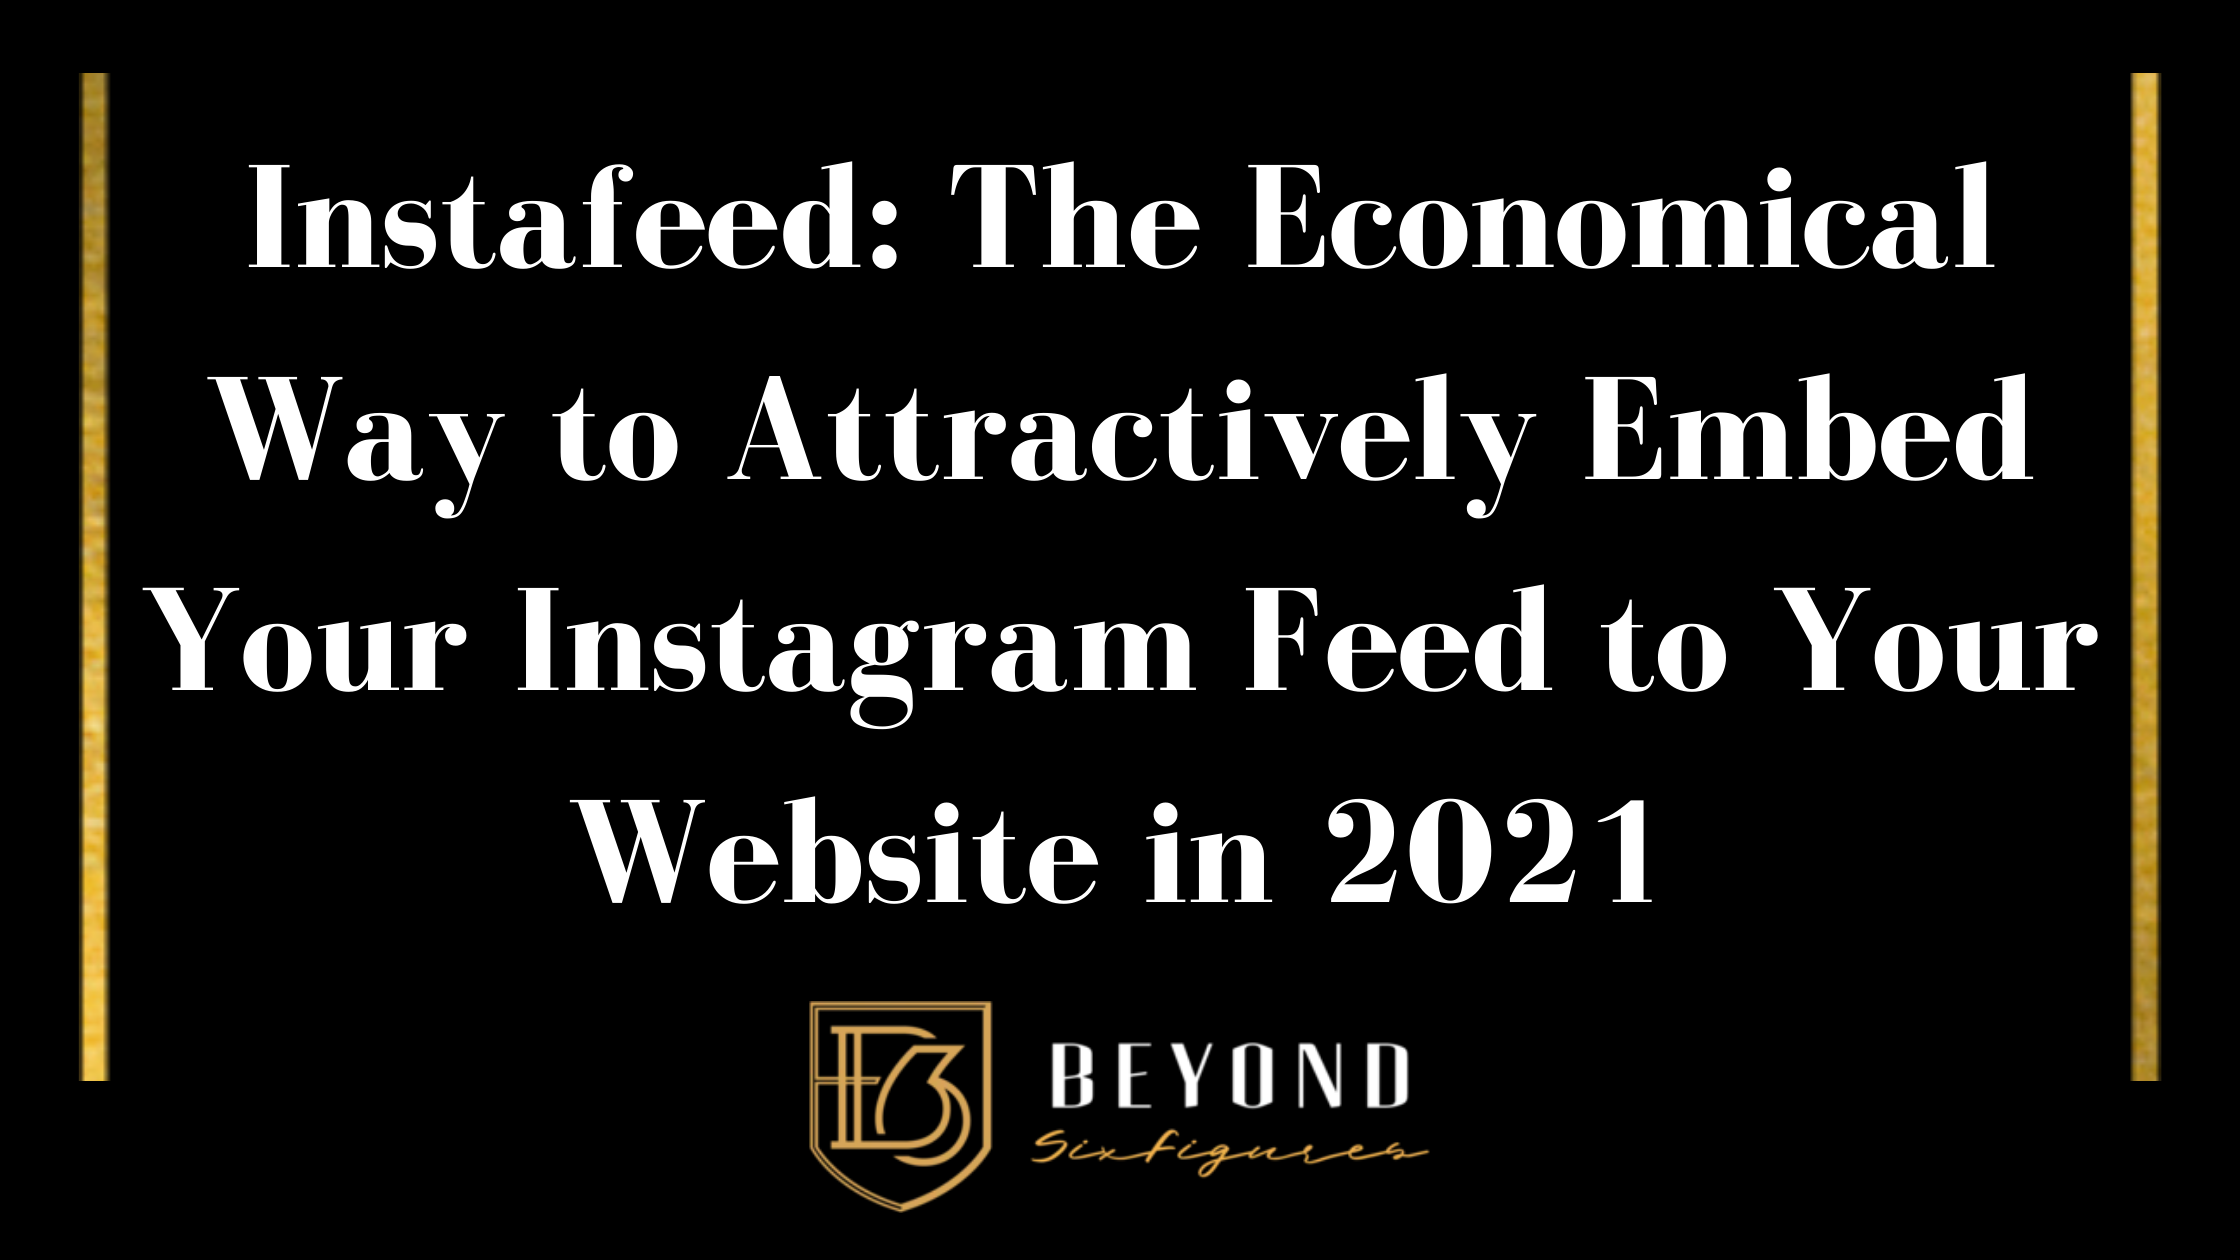 Blog Banner that reads: Instafeed: The Economical Way to Attractively Embed Your Instagram Feed to Your Website in 2021